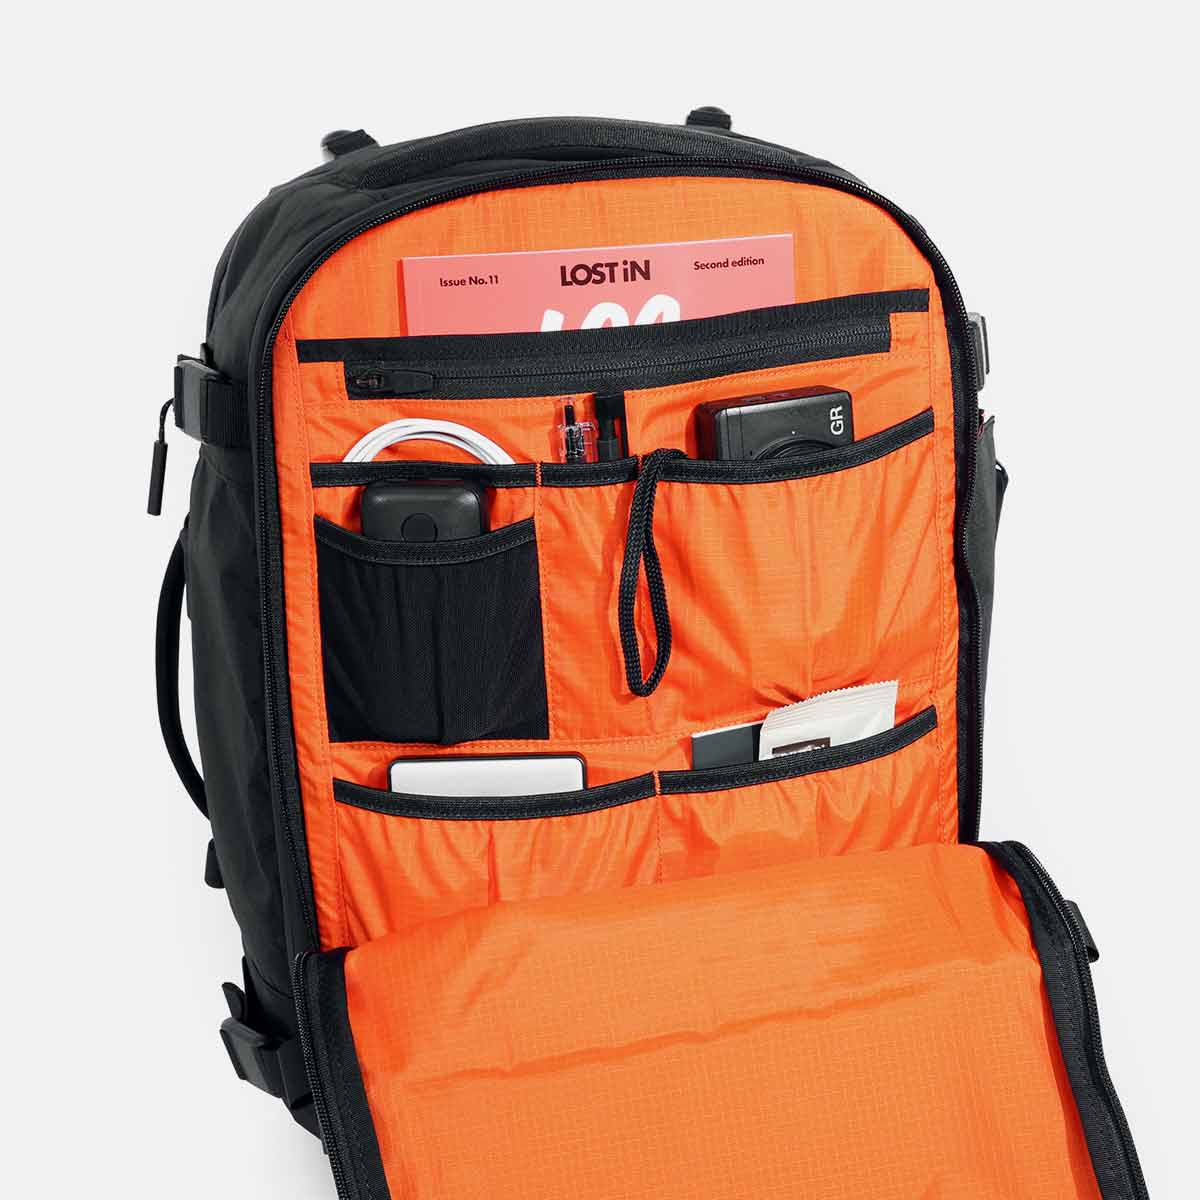 Aer travel pack 3 small x pac